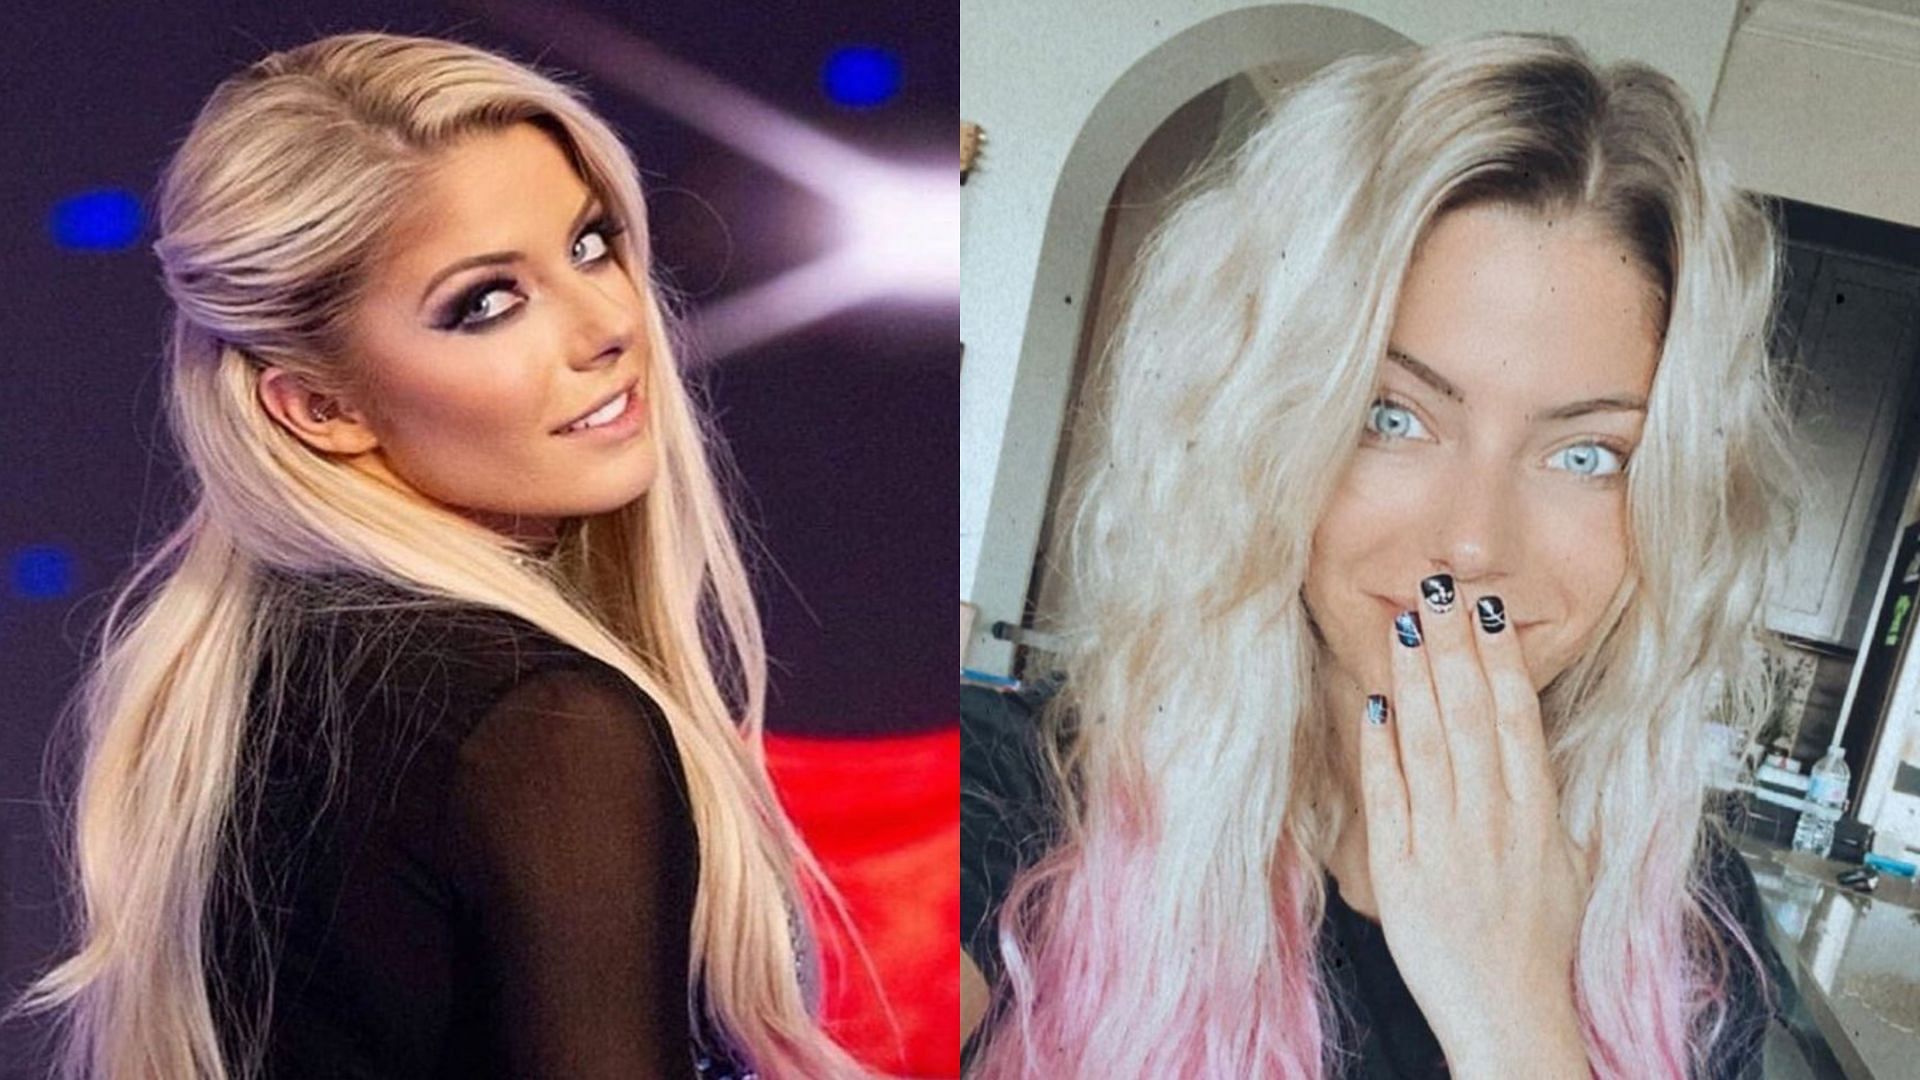 Alexa Bliss had a crush on a few men in real life